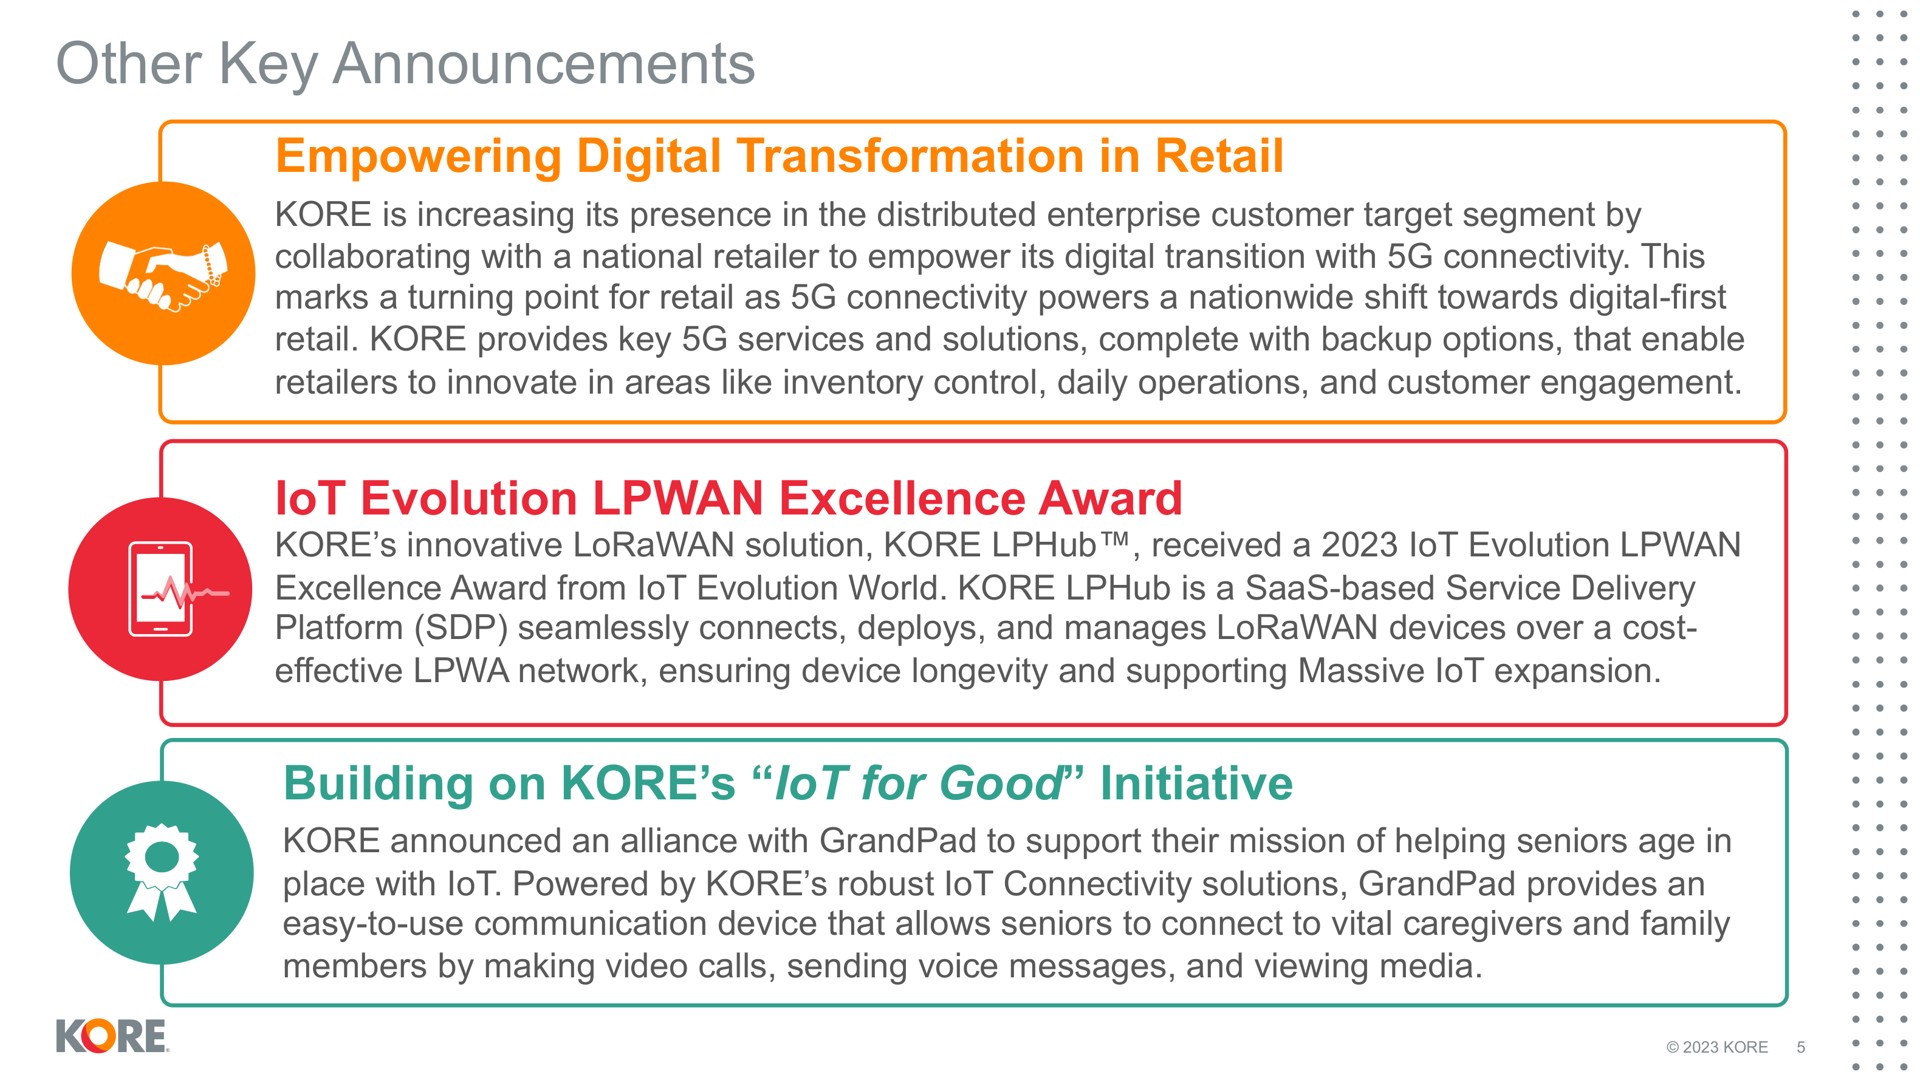 other key announcements empowering digital transformation in retail evolution excellence award building on kore for good initiative lot lot | Kore